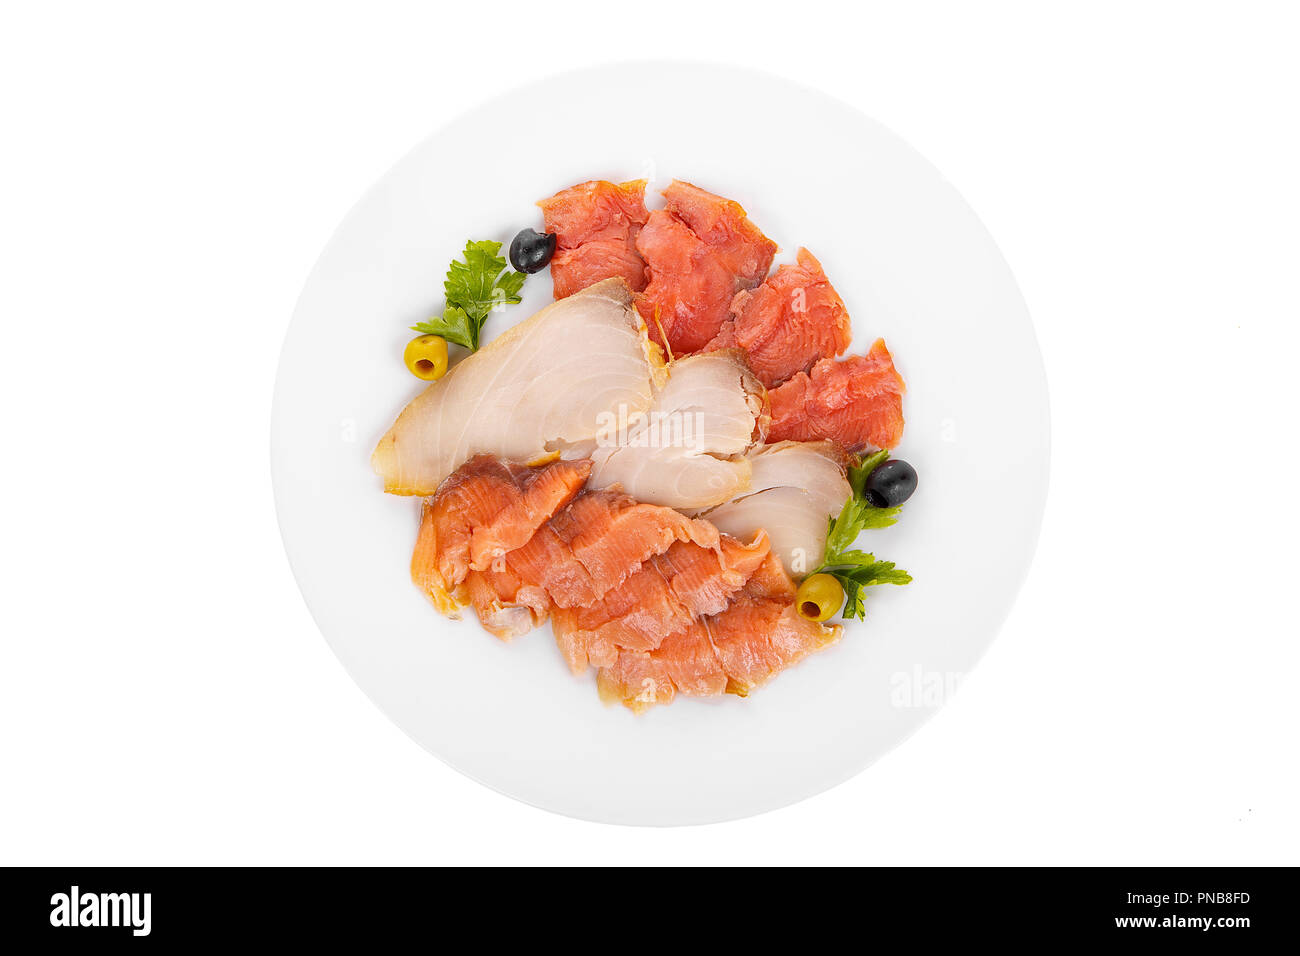 Cold appetizer before alcohol, assorted fish, salmon fillet, lightly salted, chum, smoked with wasabi sauce, mayonnaise, sour cream, olives, parsley o Stock Photo